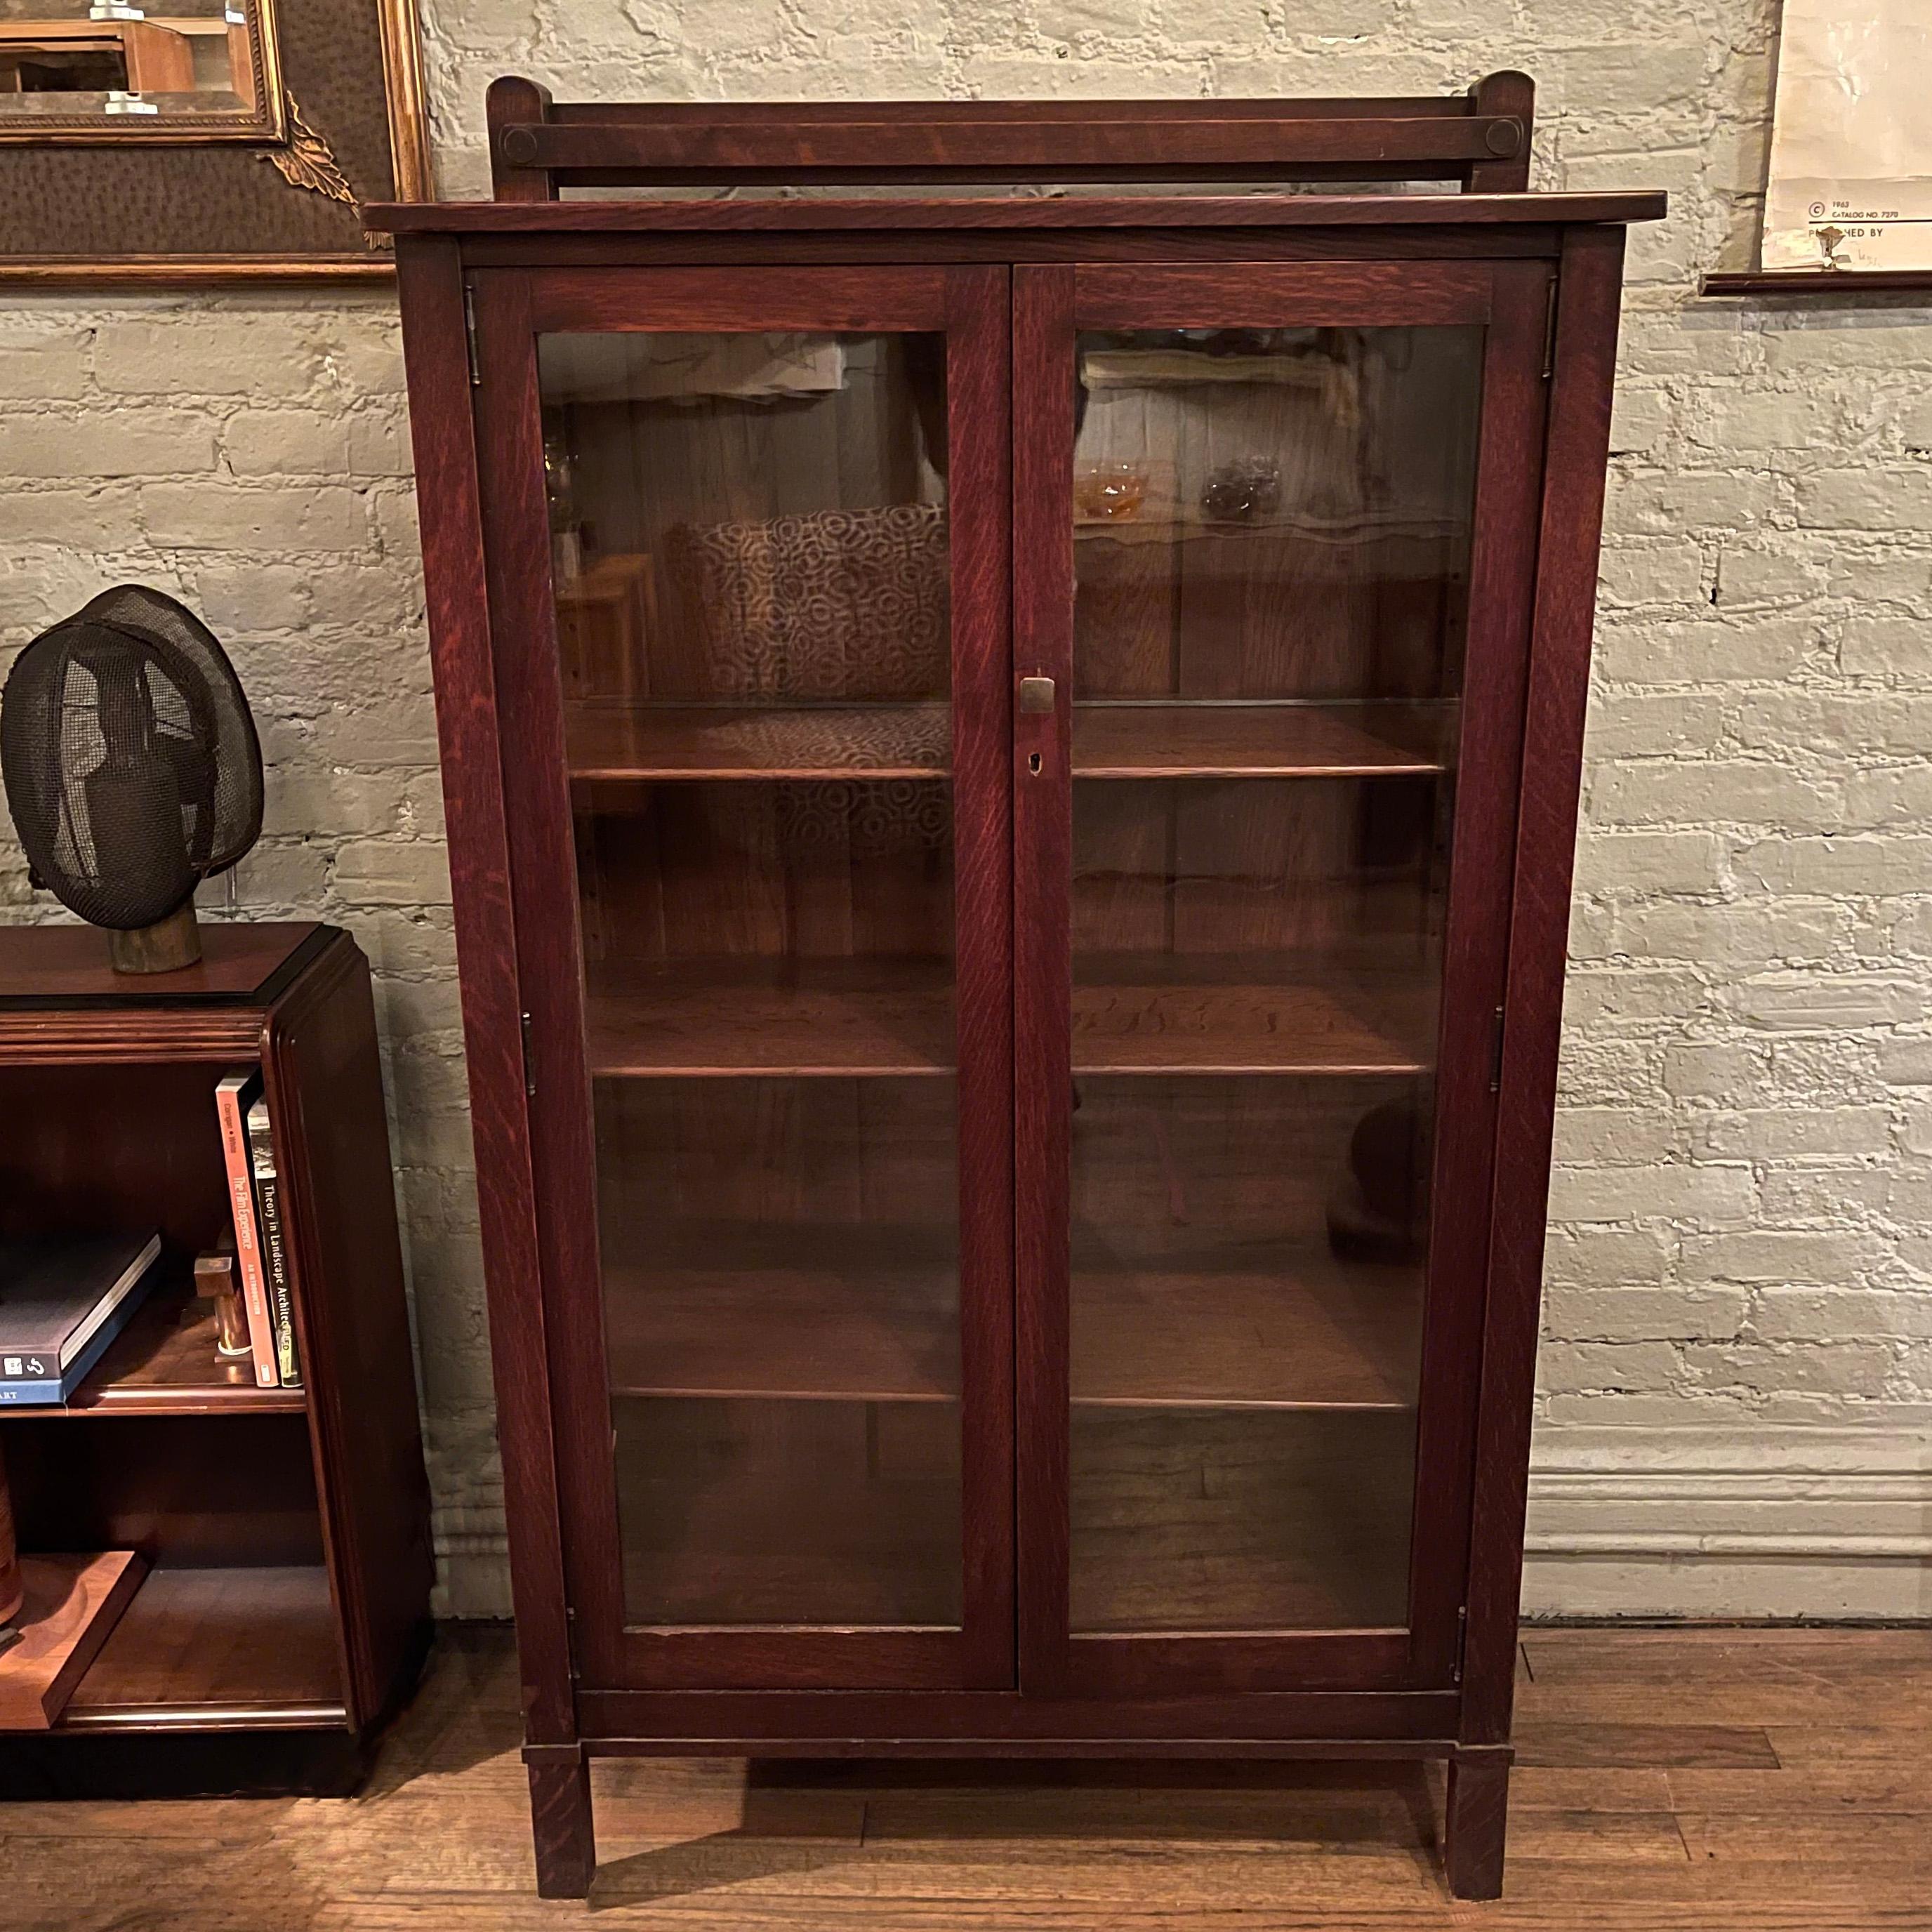 Early 20th century, oak, bookcase, display cabinet features glass on 3 sides and 3 adjustable wood shelves. The height to the top of the cabinet is 55.25 inches, the overall height is 58.5 inches. The interior depth is 11.5 inches.